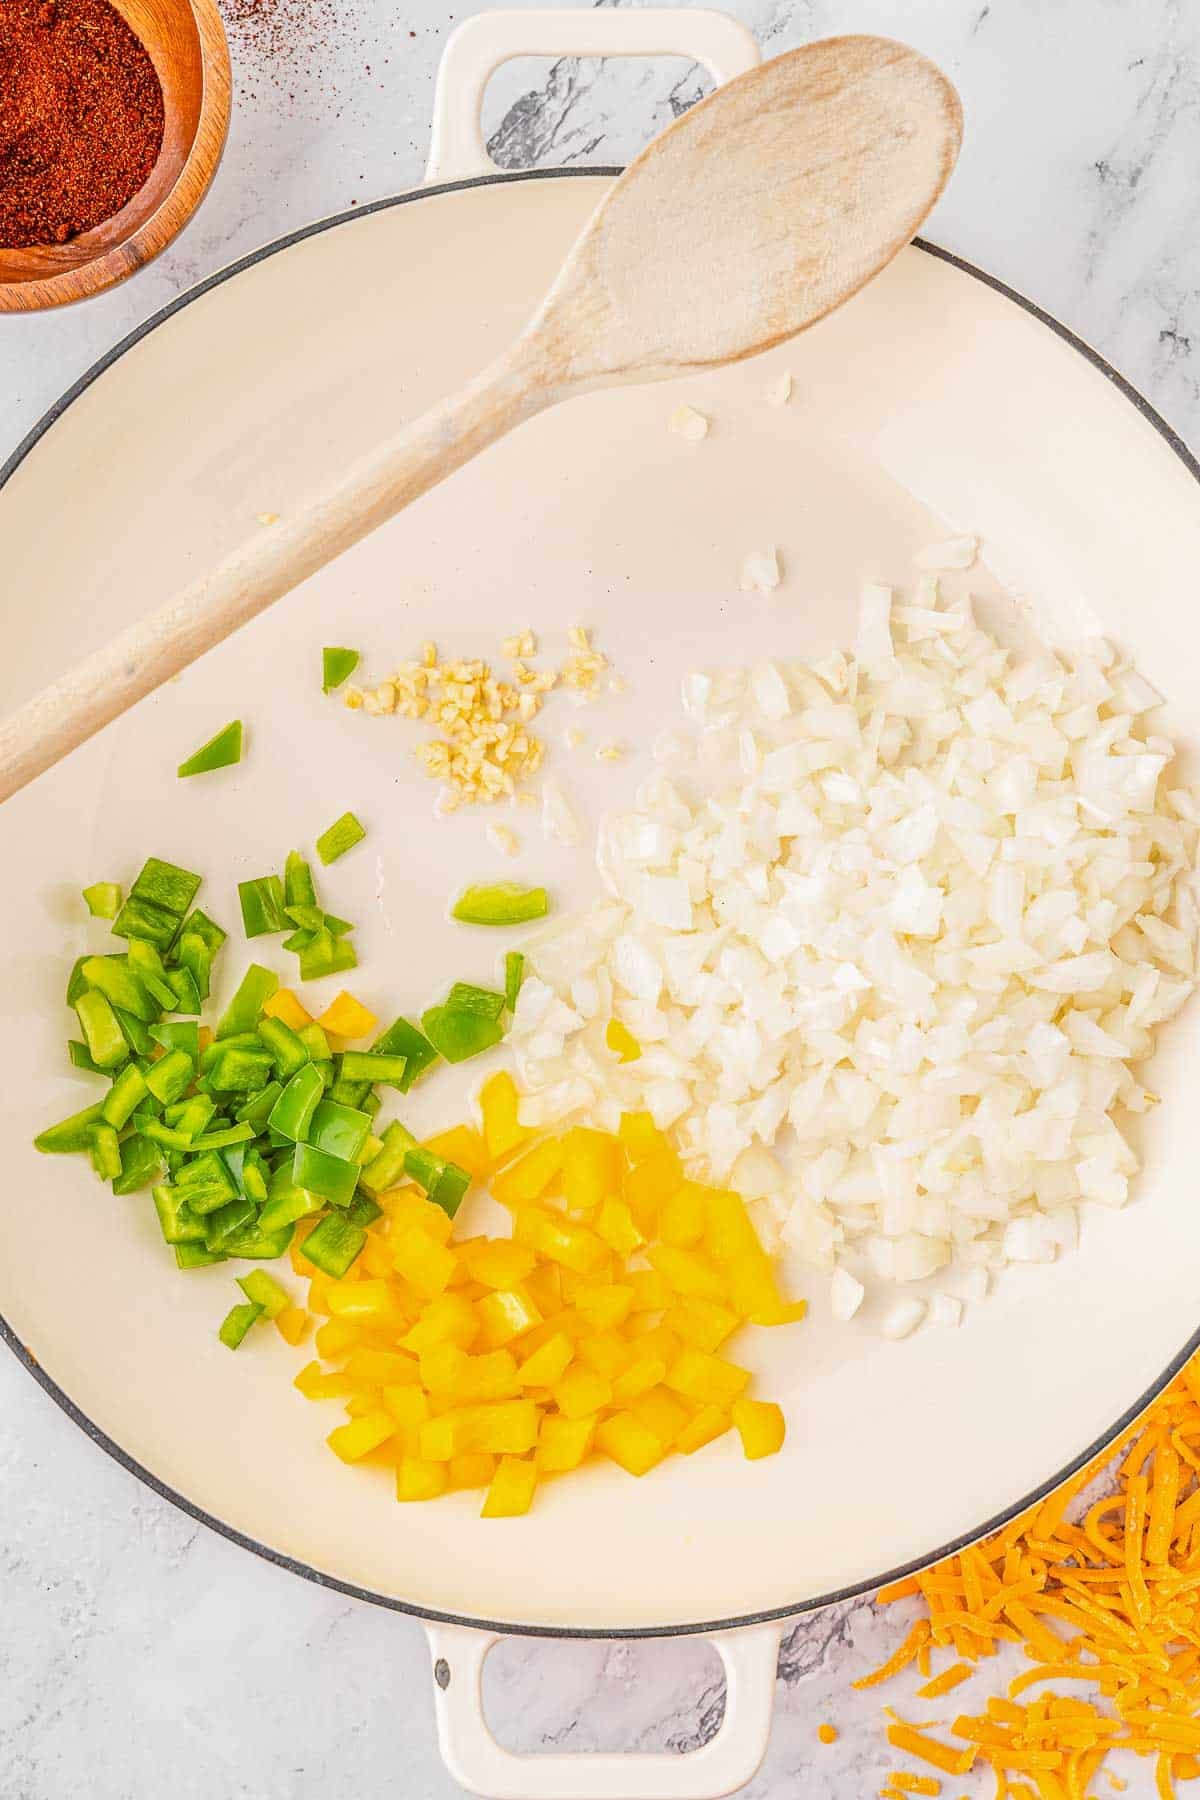 Chopped onion, yellow bell pepper and green bell pepper in a white pot.